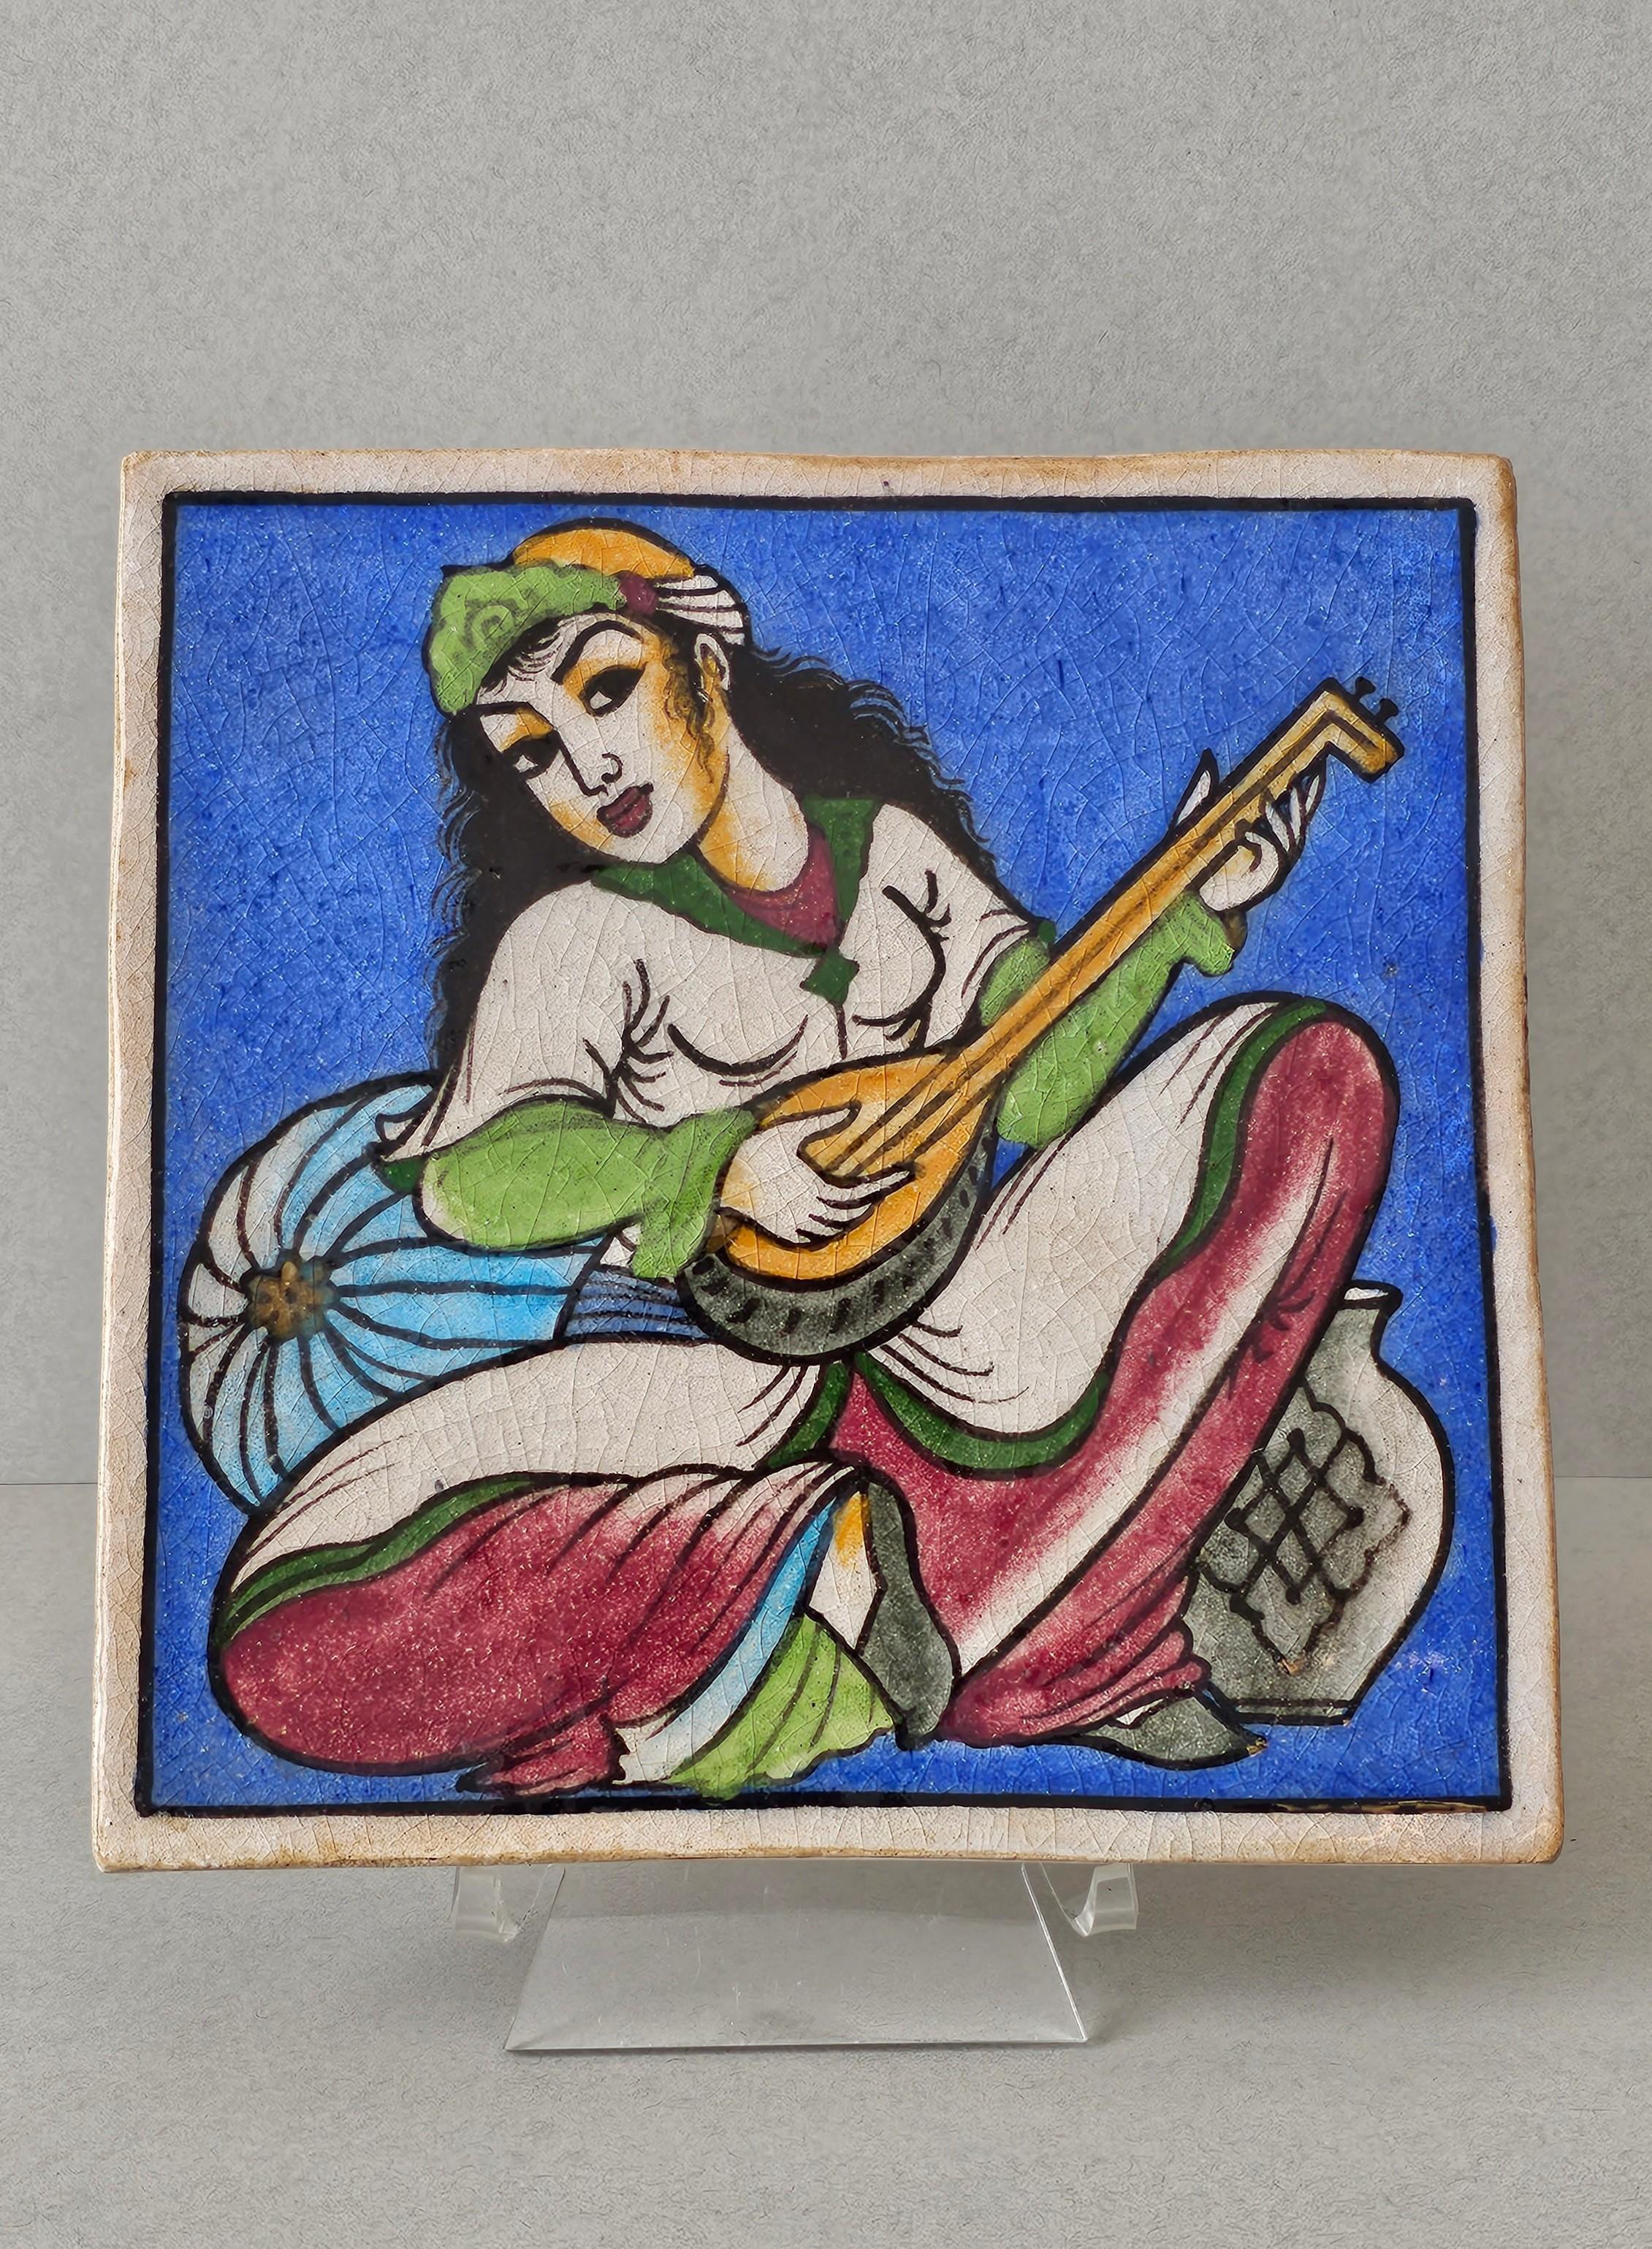 Indo-Persian Hand Painted Ceramic Wall Tile  In Good Condition For Sale In Forney, TX